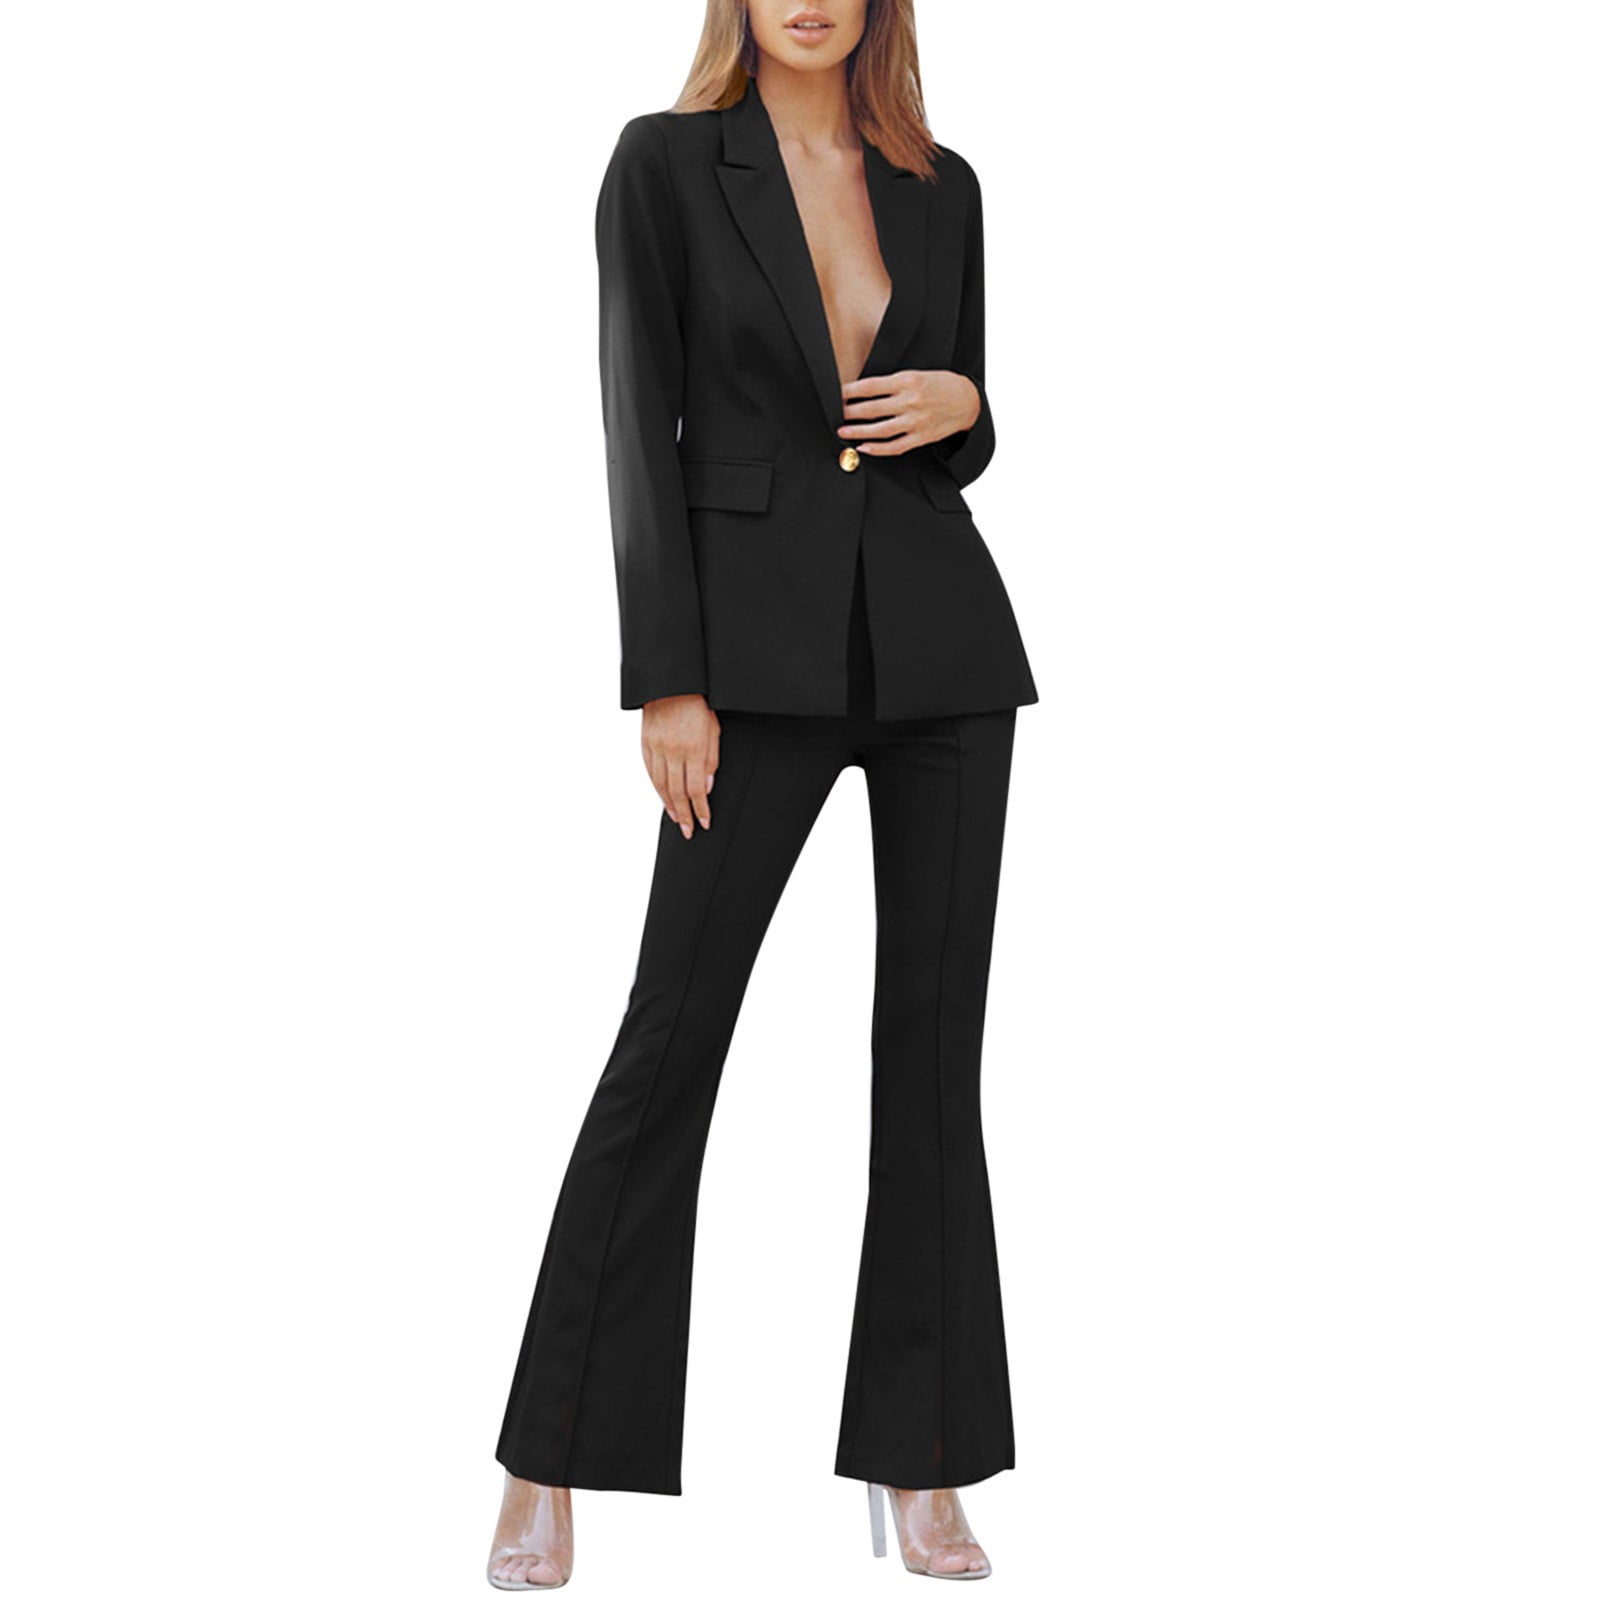 Womens Suits  Womens Suit Jackets  Trousers For Work  Hobbs London 